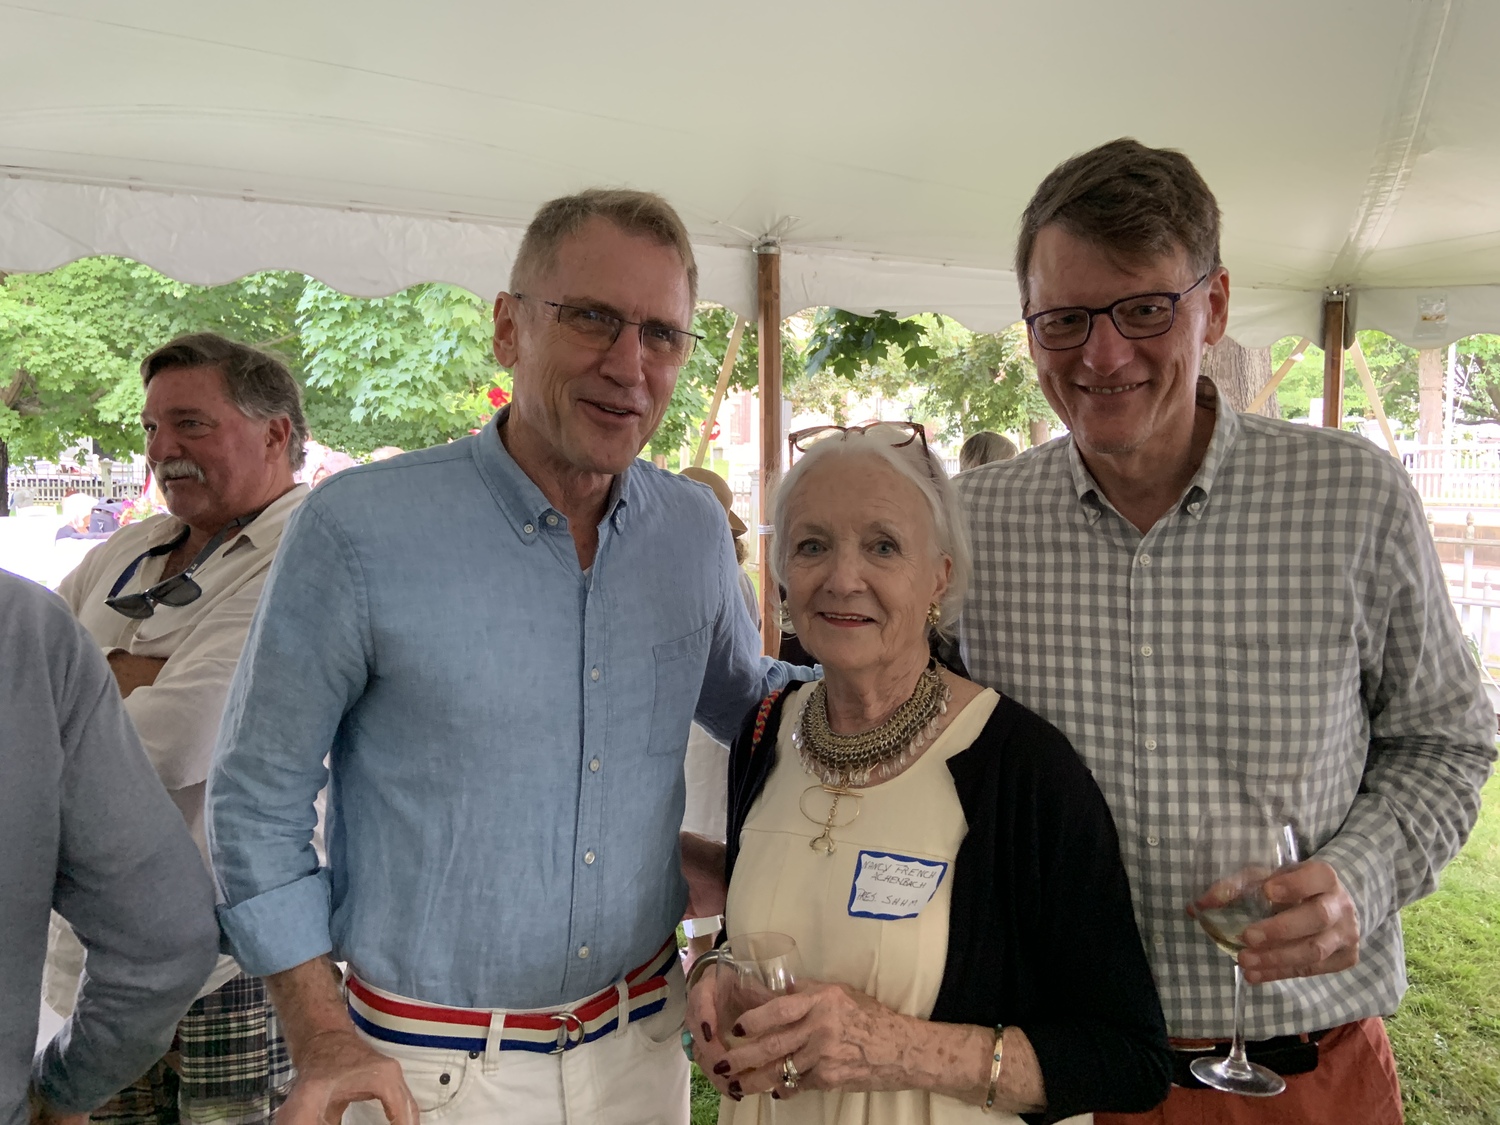 Sag Harbor Historical Museum President Nancy French Achenbach with Ted Porter, left, and Steve Godlike at the museum's annual summer fundraising party. STEPHEN J. KOTZ